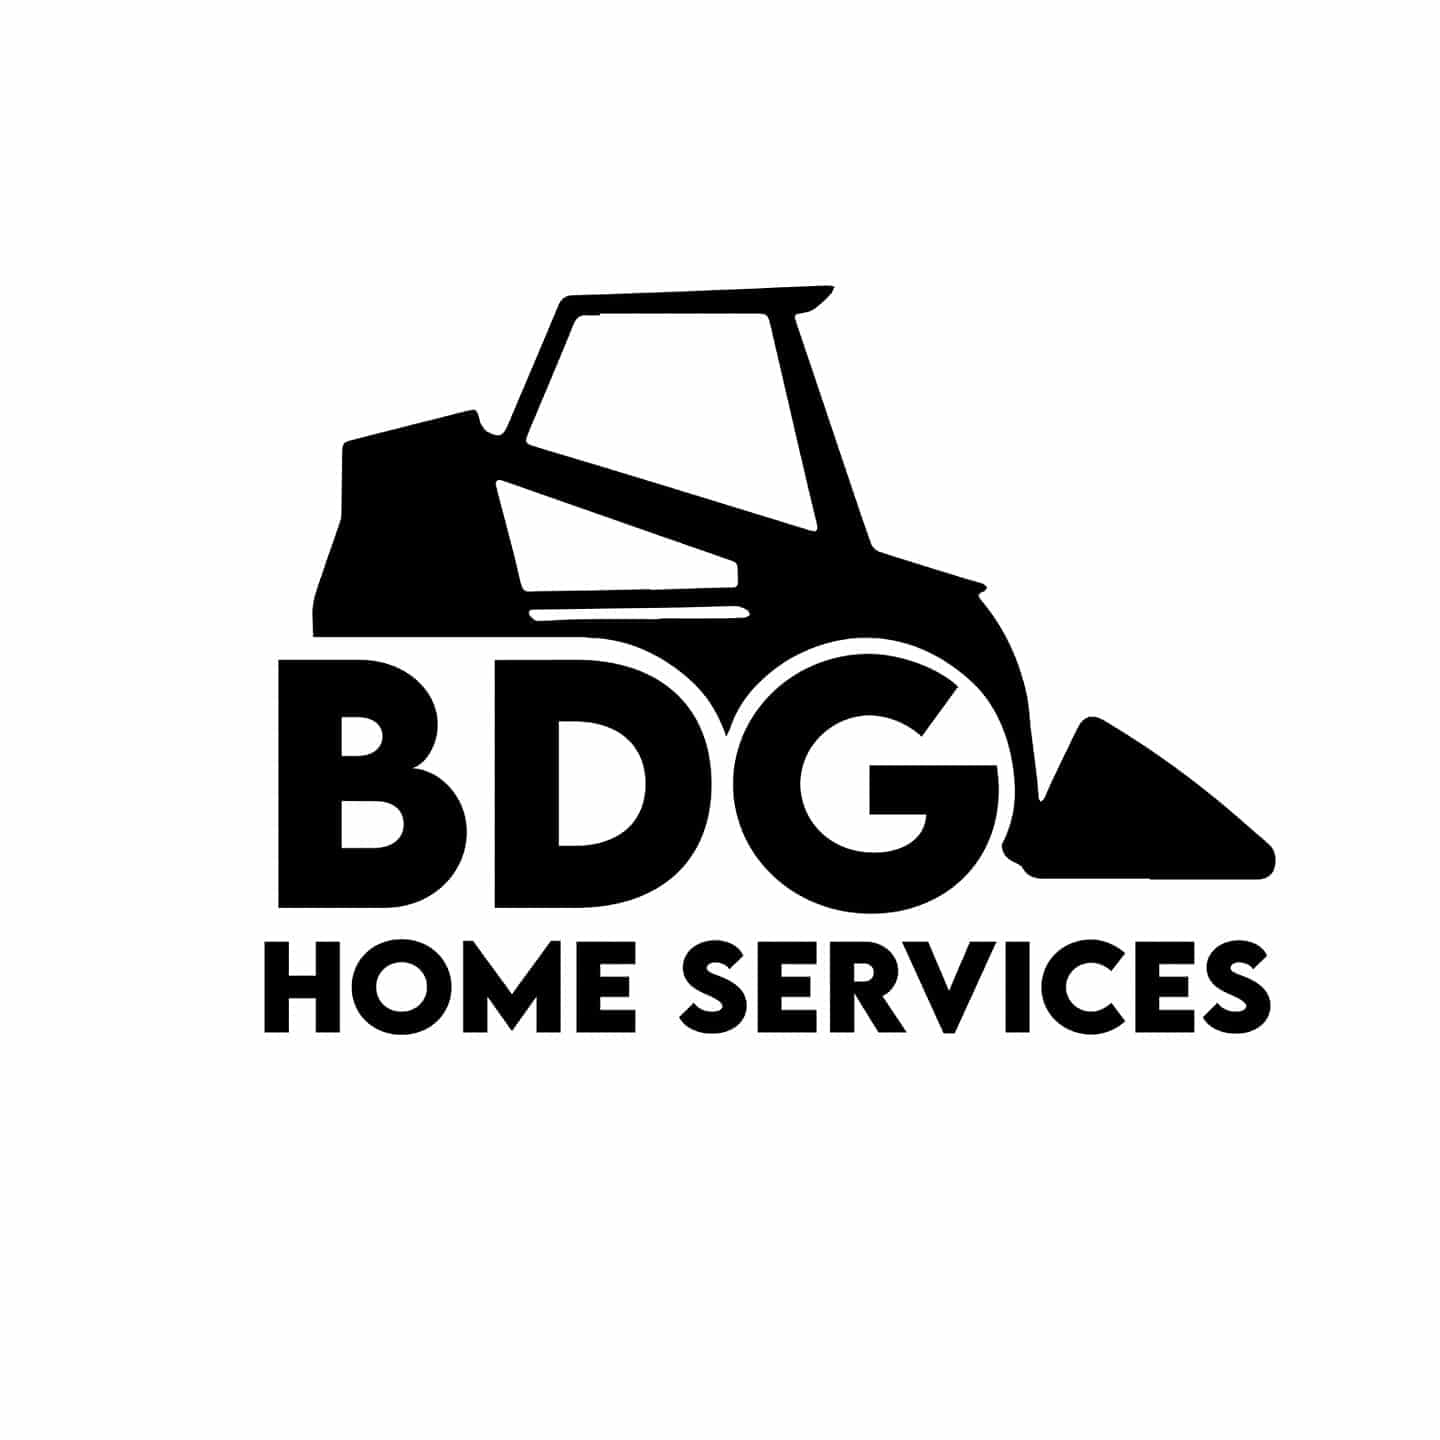 BDG Home Services